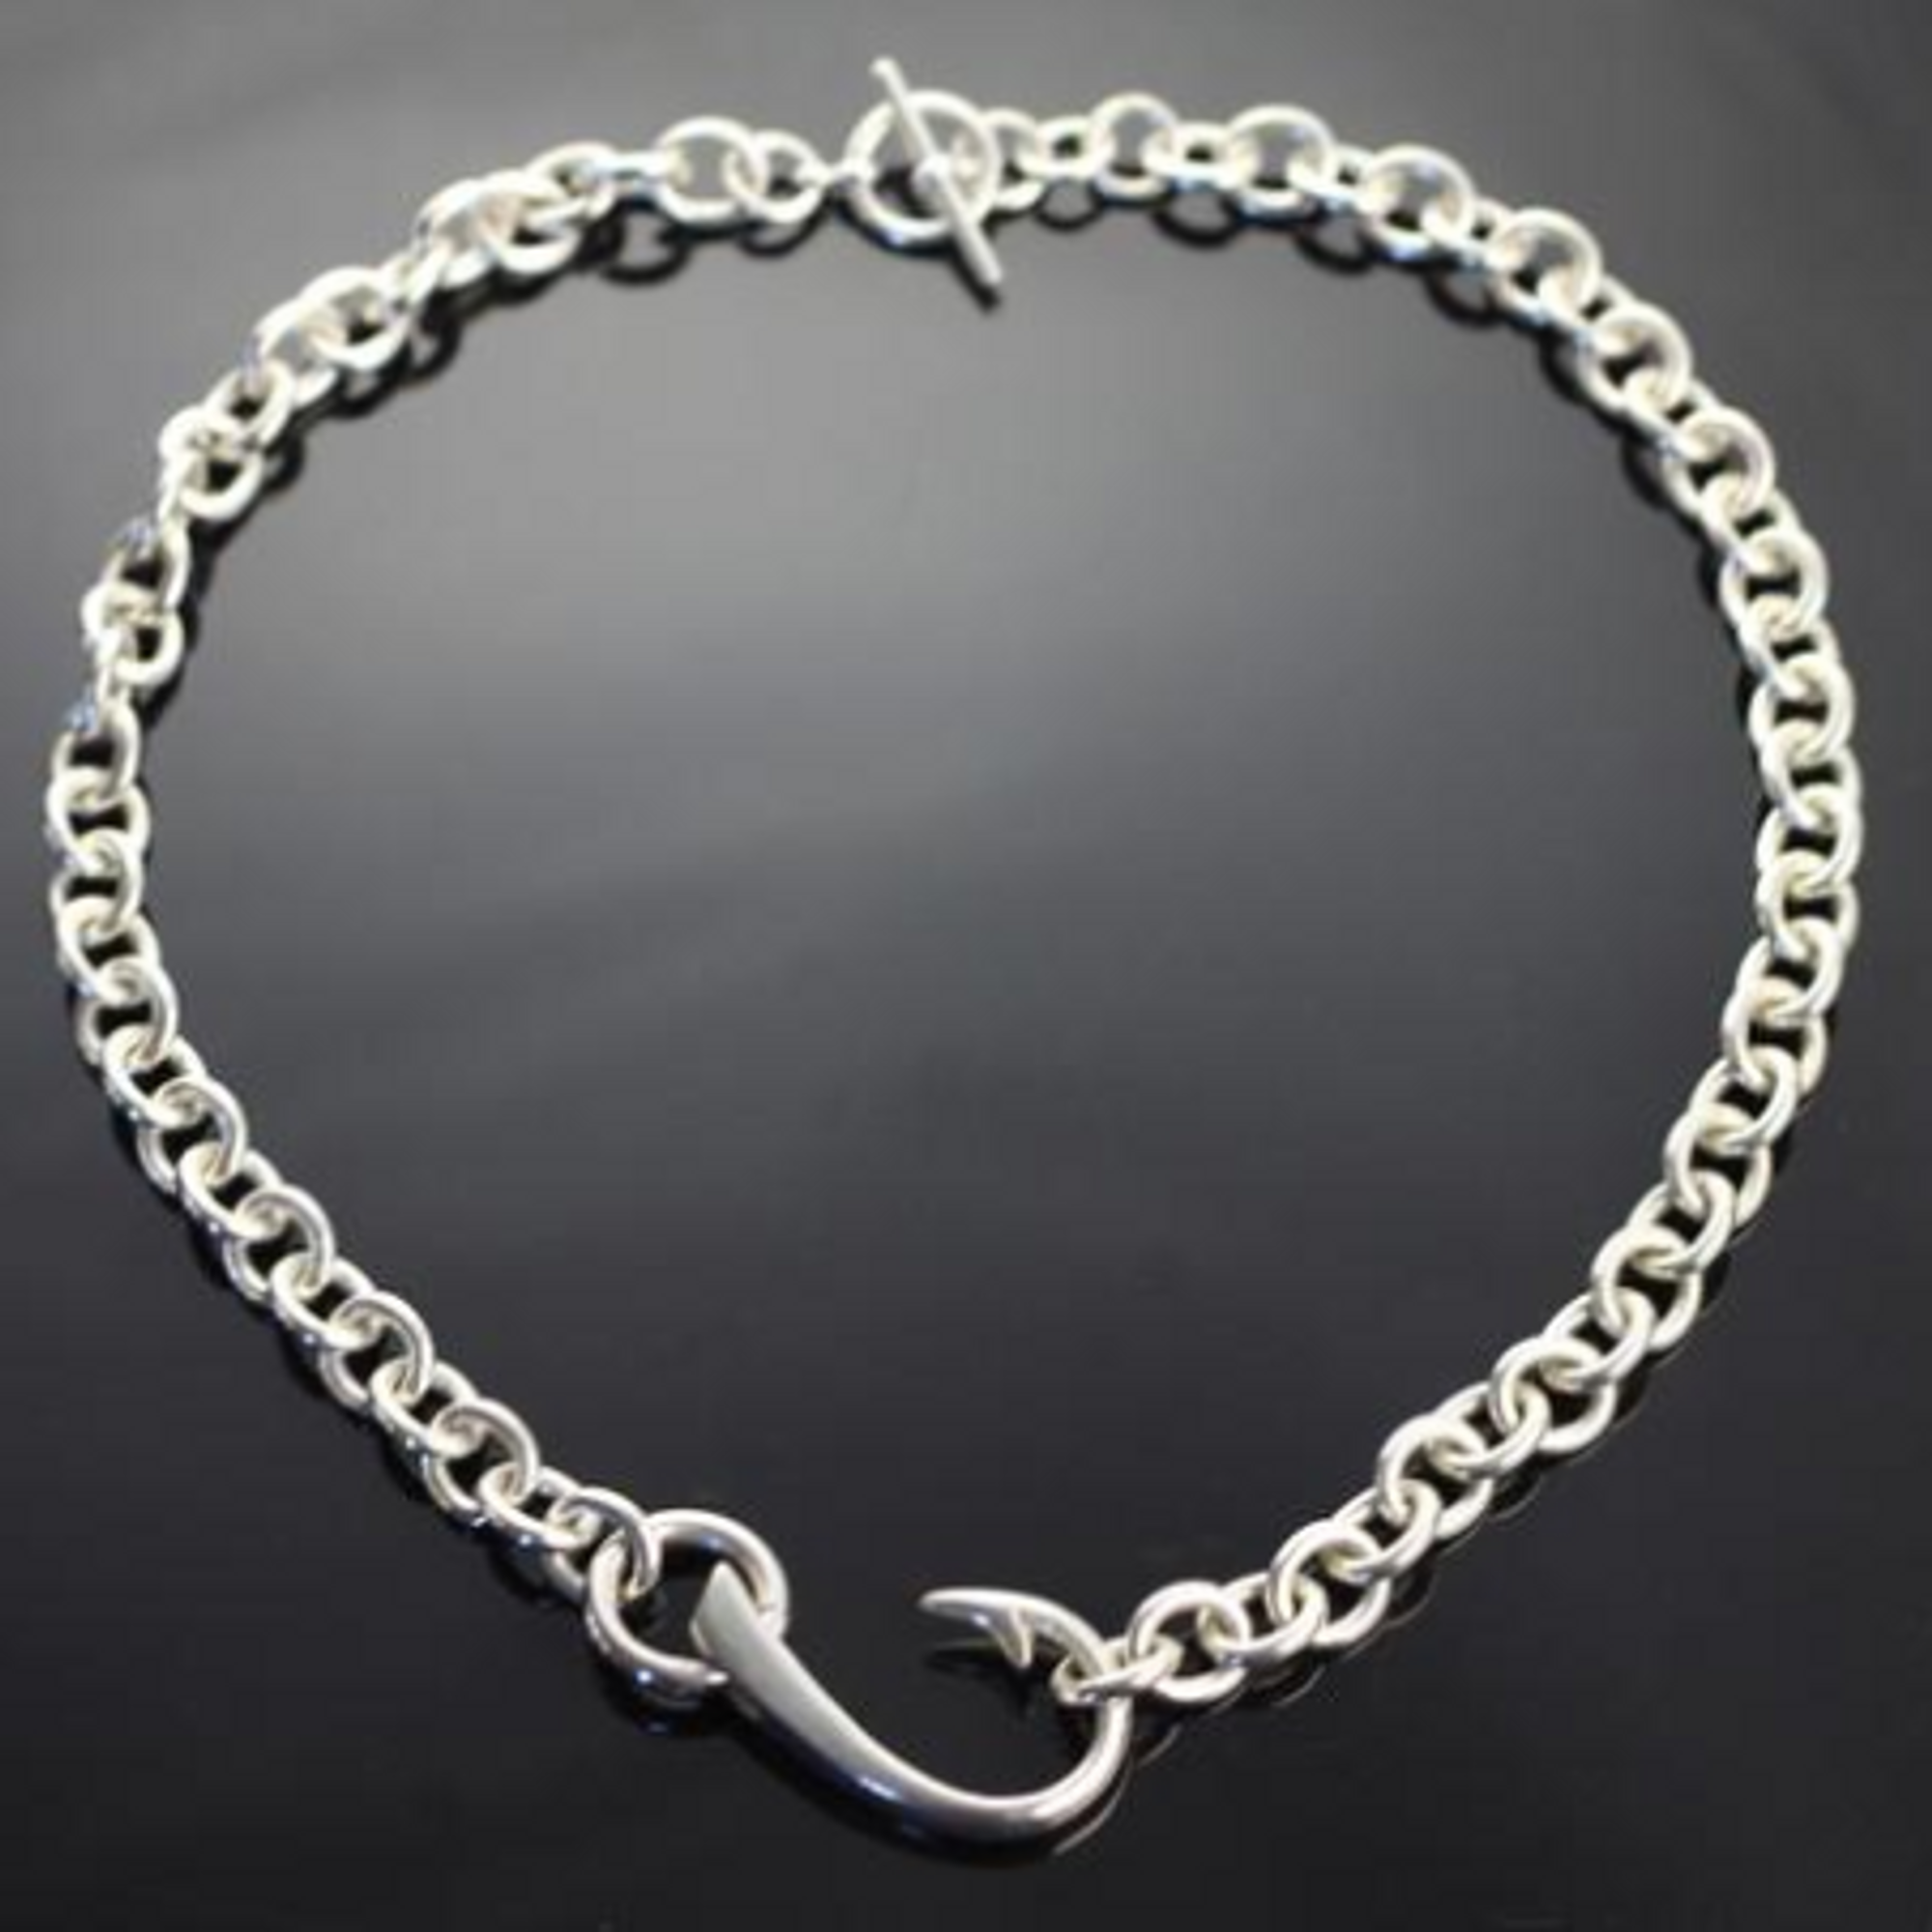 Large Fishhook Pendant on Heavy Link Chain Necklace